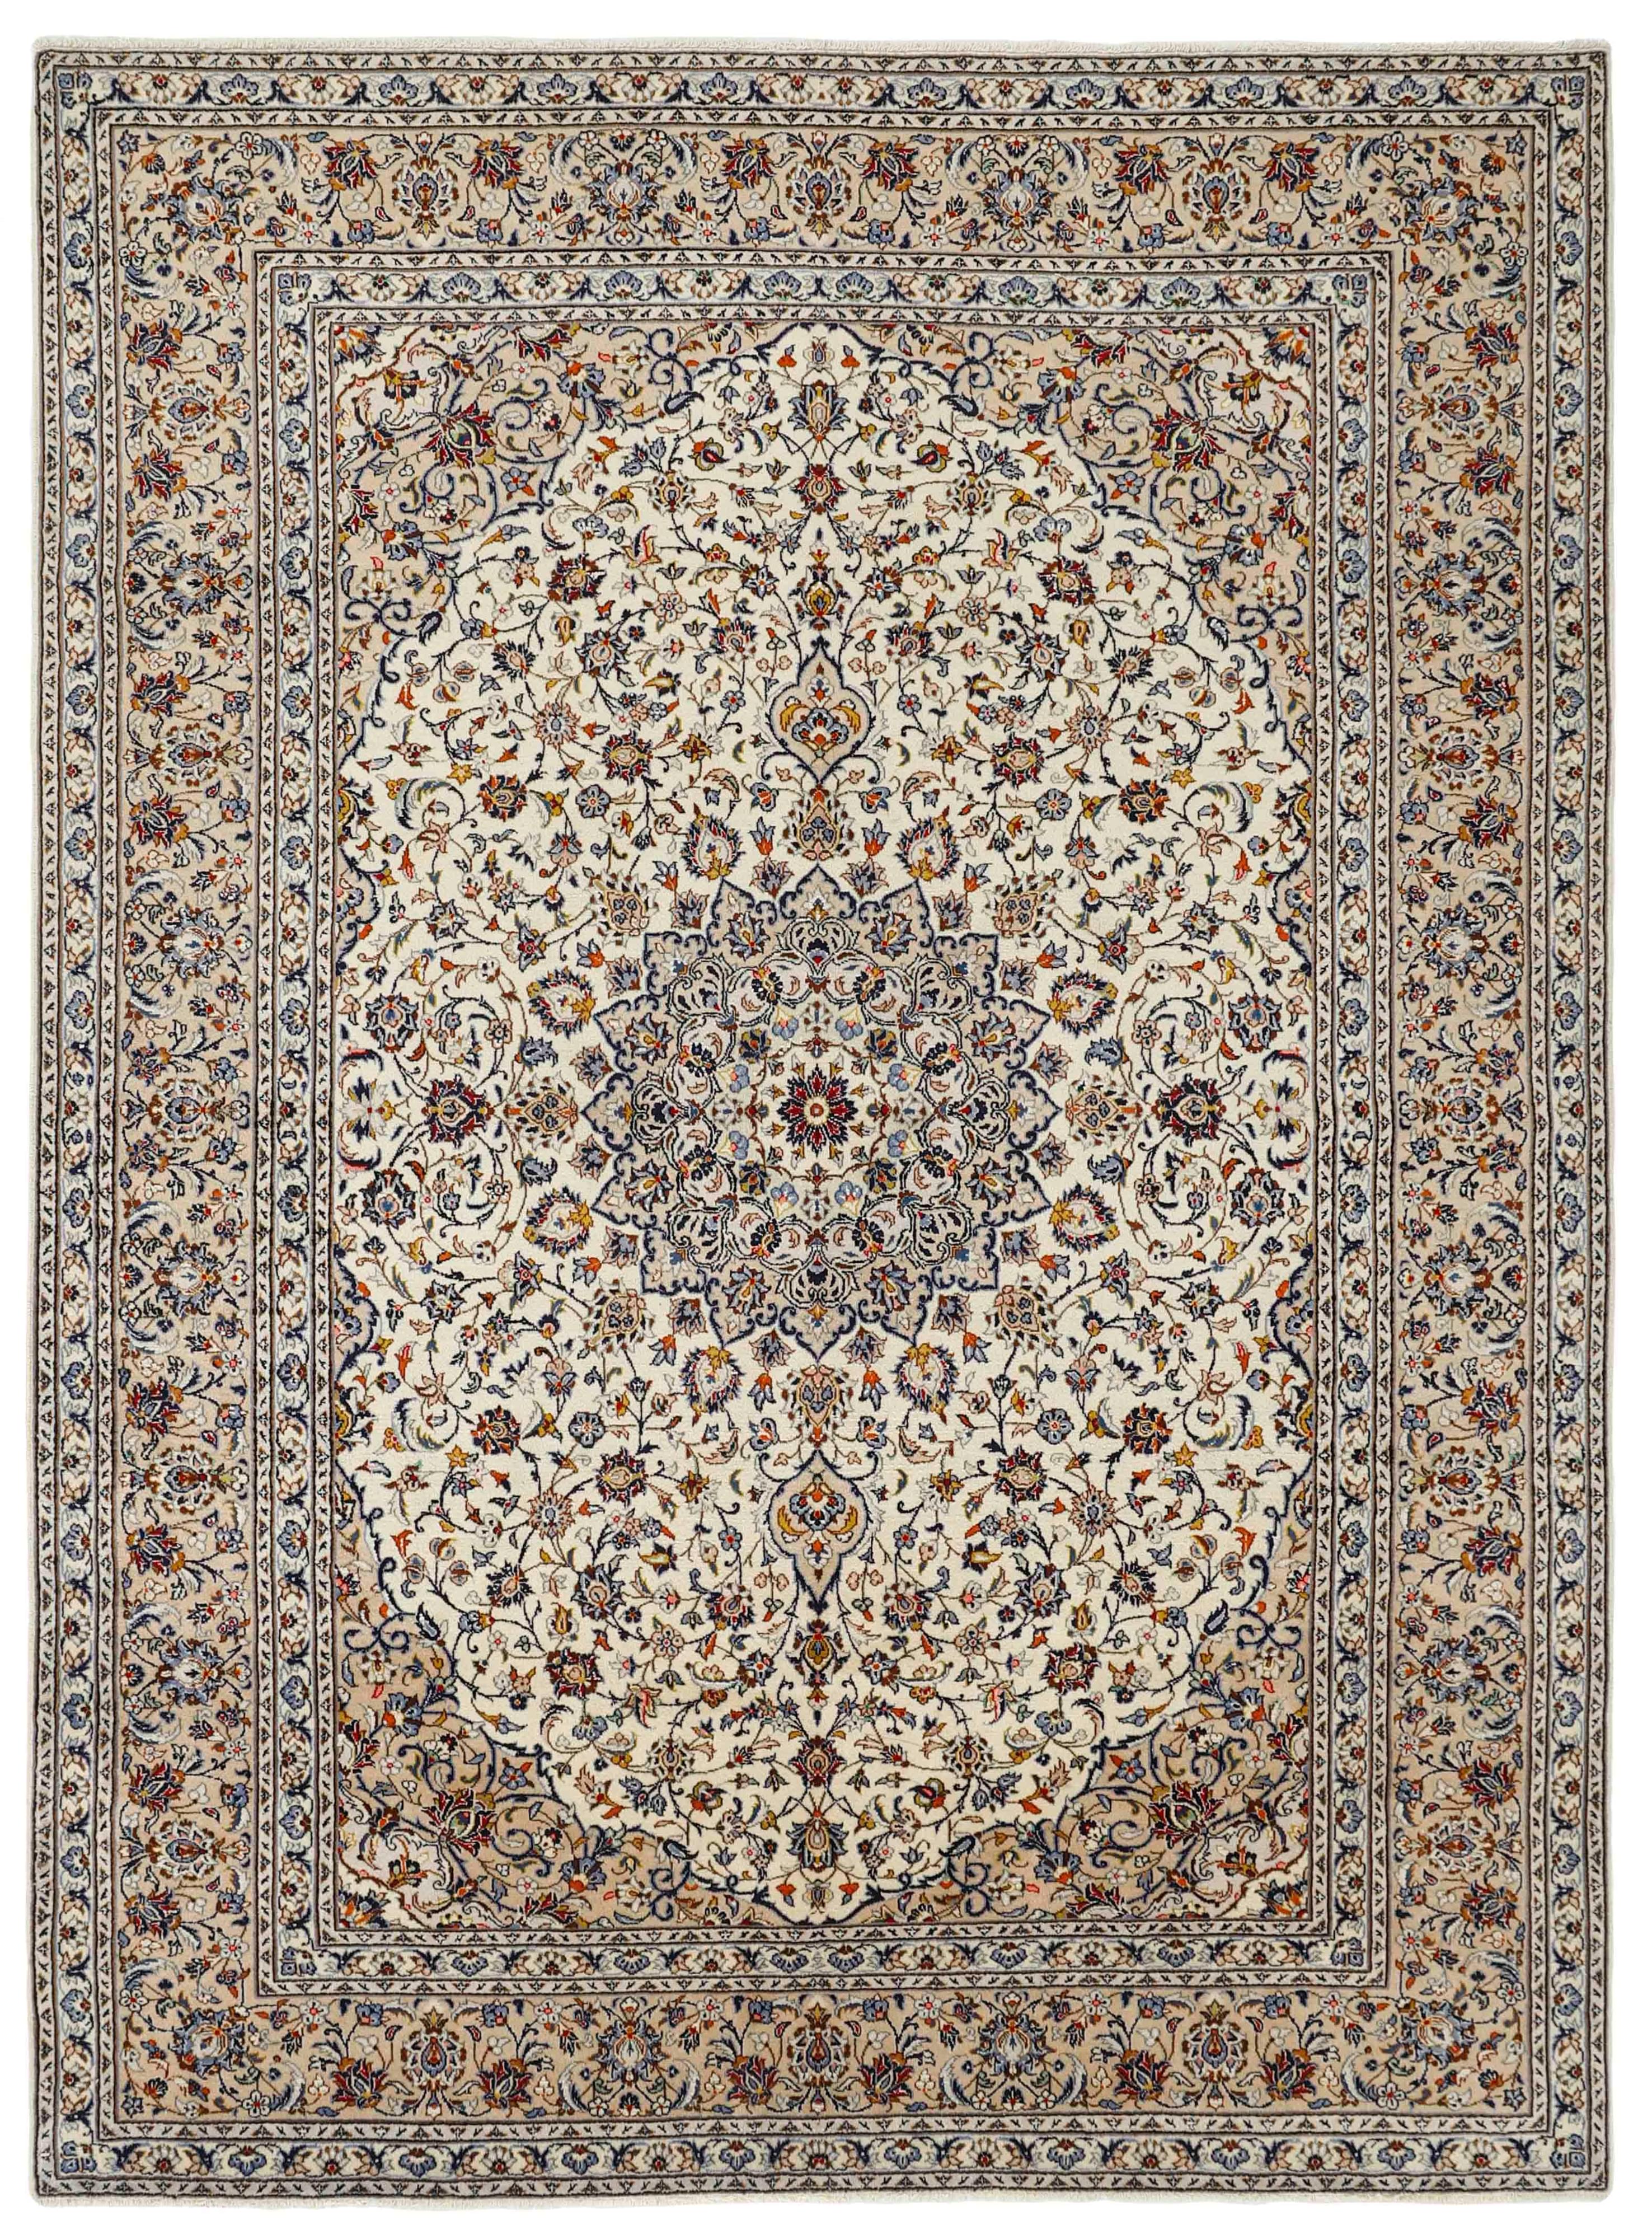 Authentic persian rug with traditional floral design in beige and blue